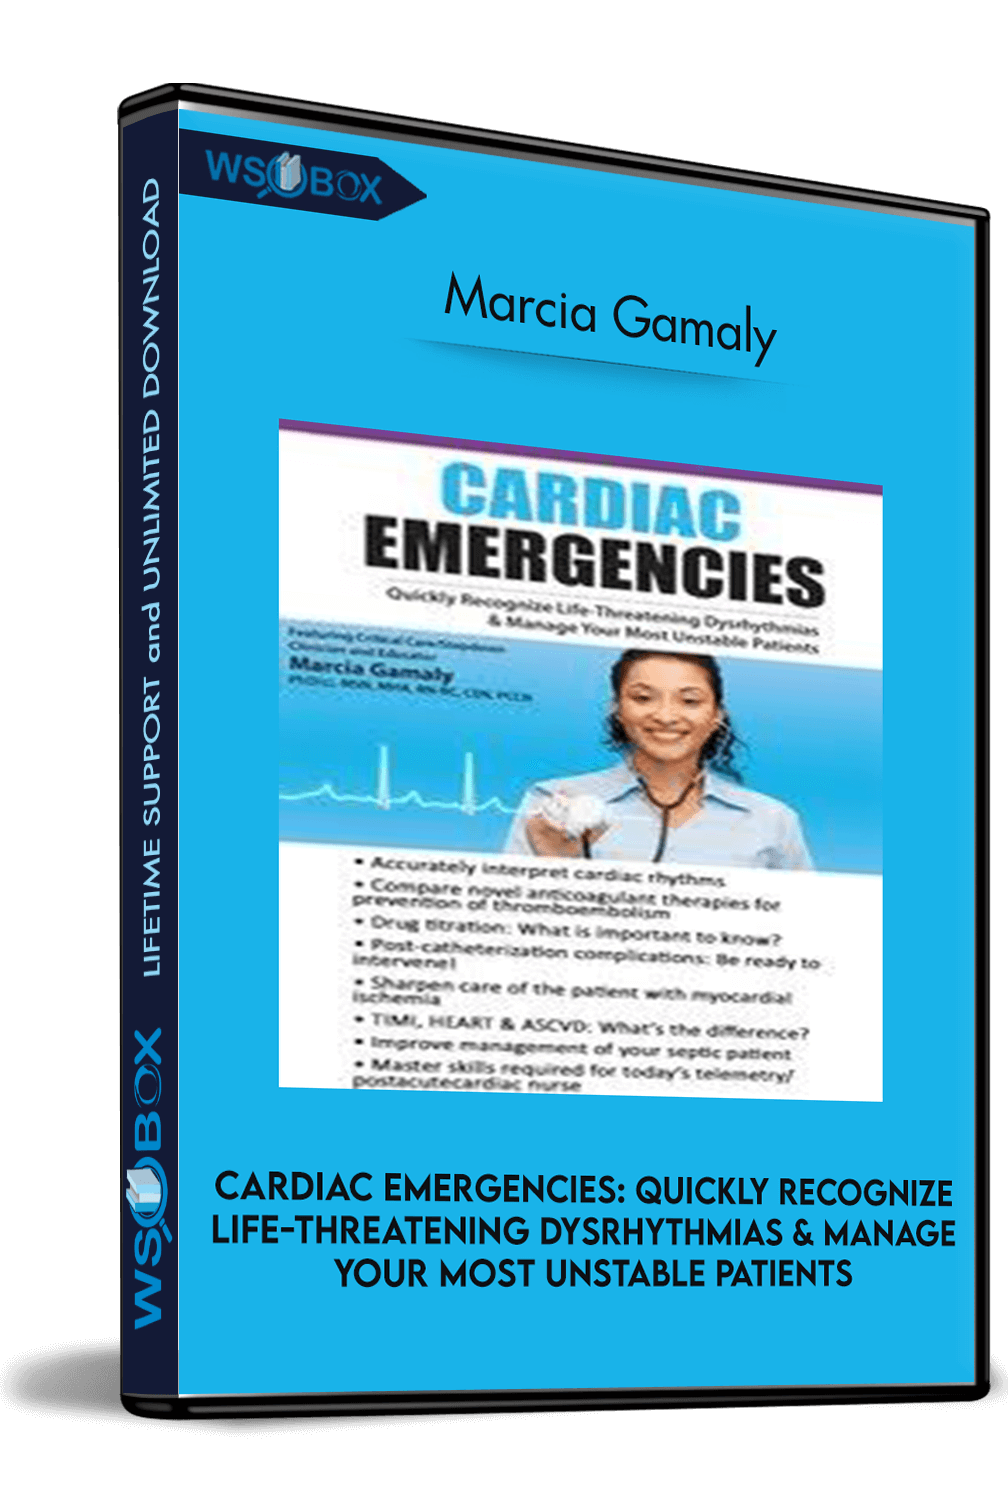 Cardiac Emergencies: Quickly Recognize Life-Threatening Dysrhythmias & Manage Your Most Unstable Patients – Marcia Gamaly